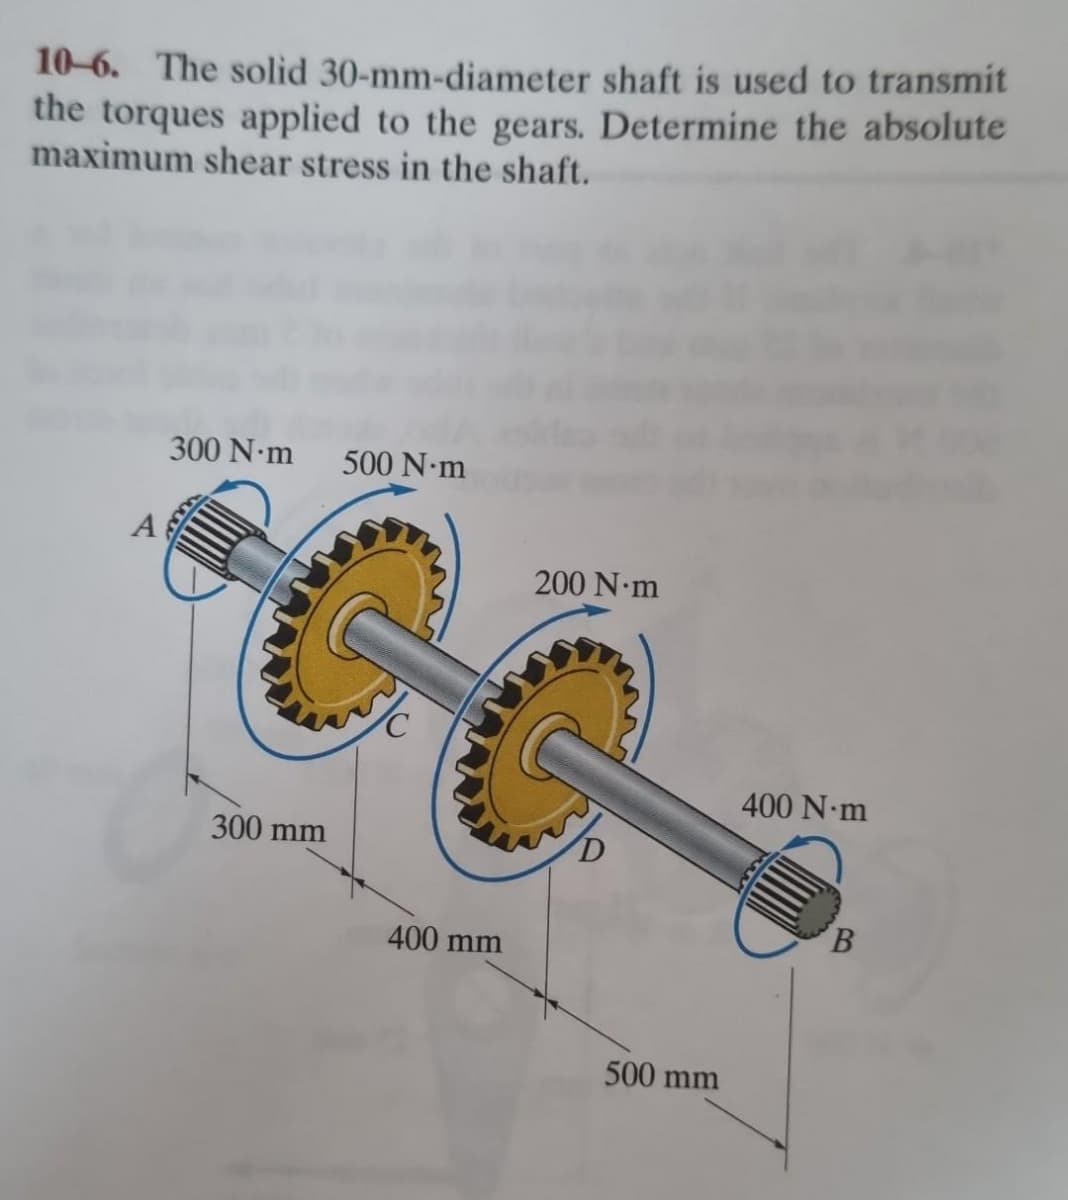 10-6. The solid 30-mm-diameter
shaft is used to transmit
the torques applied to the gears. Determine the absolute
maximum shear stress in the shaft.
300 N·m 500 N-m
300 mm
A
400 mm
200 N·m
500 mm
400 N·m
B